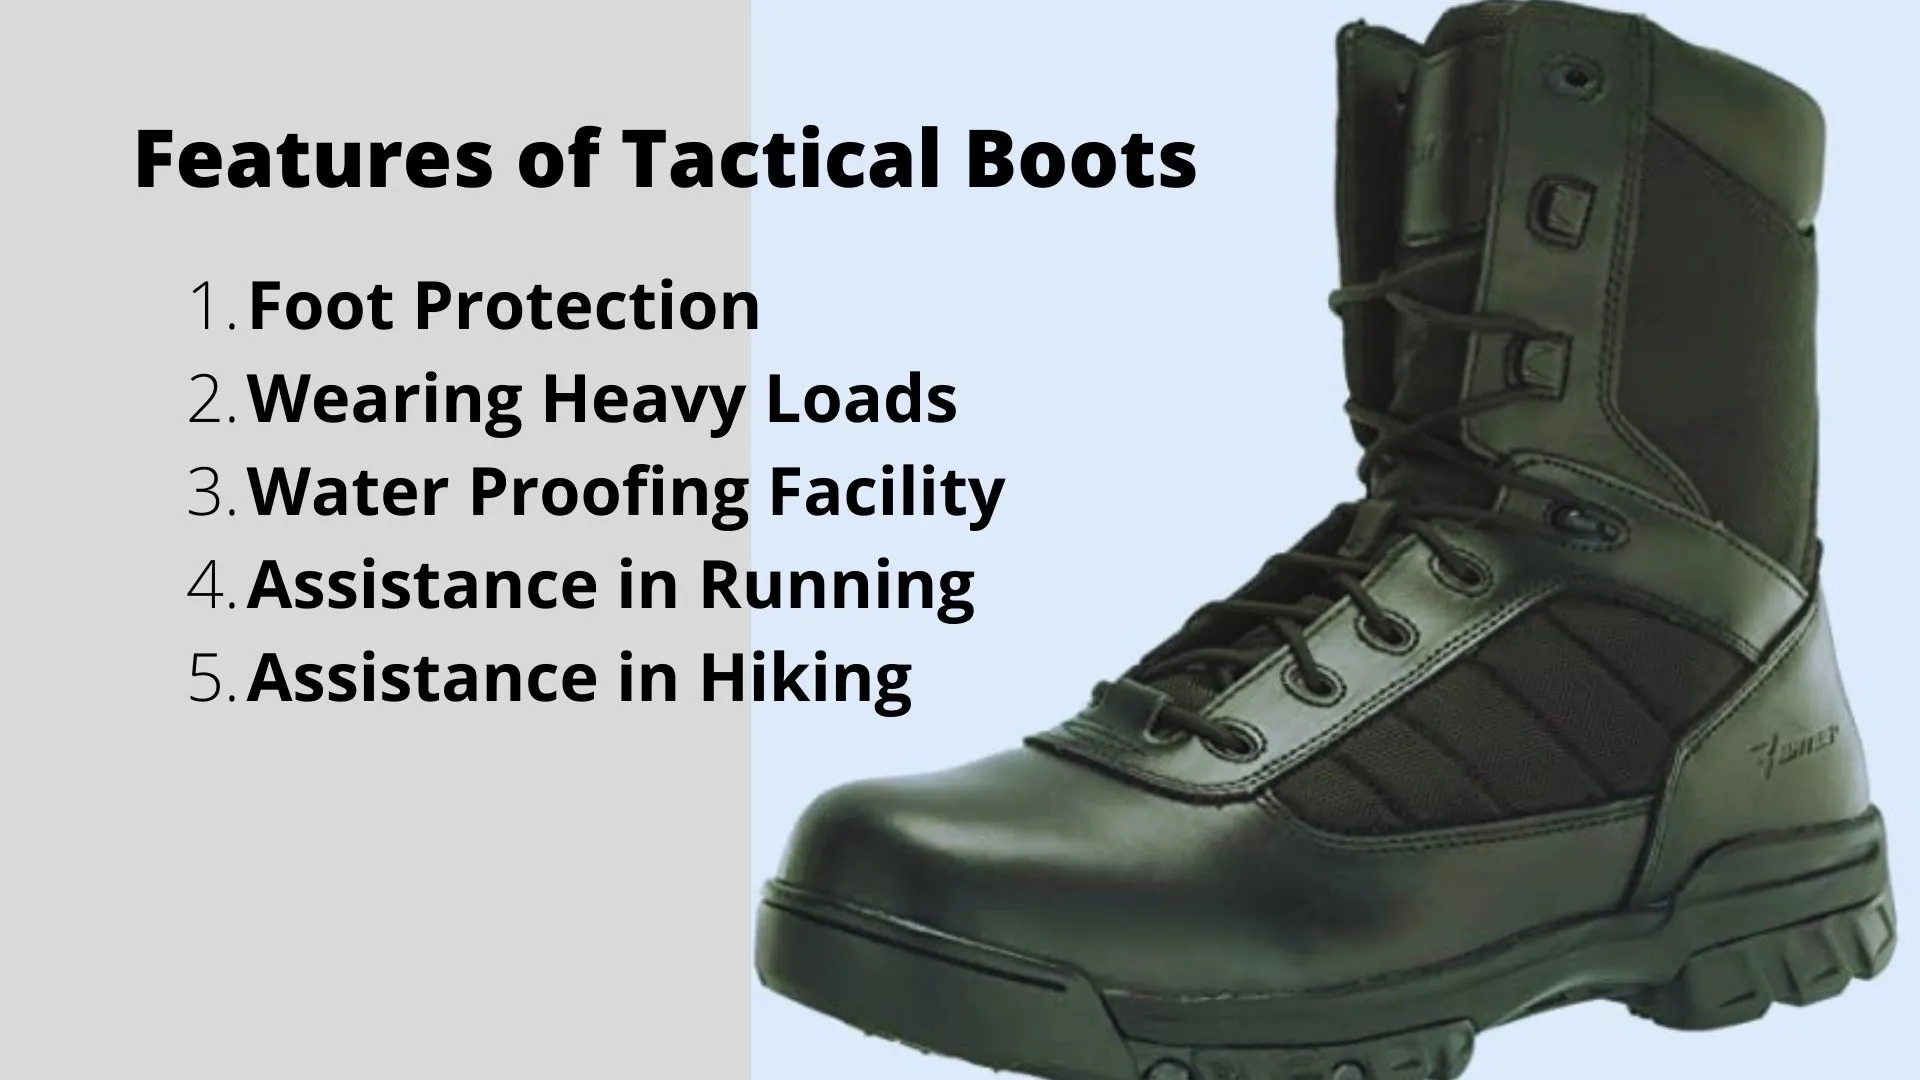 Features of Tactical Boots